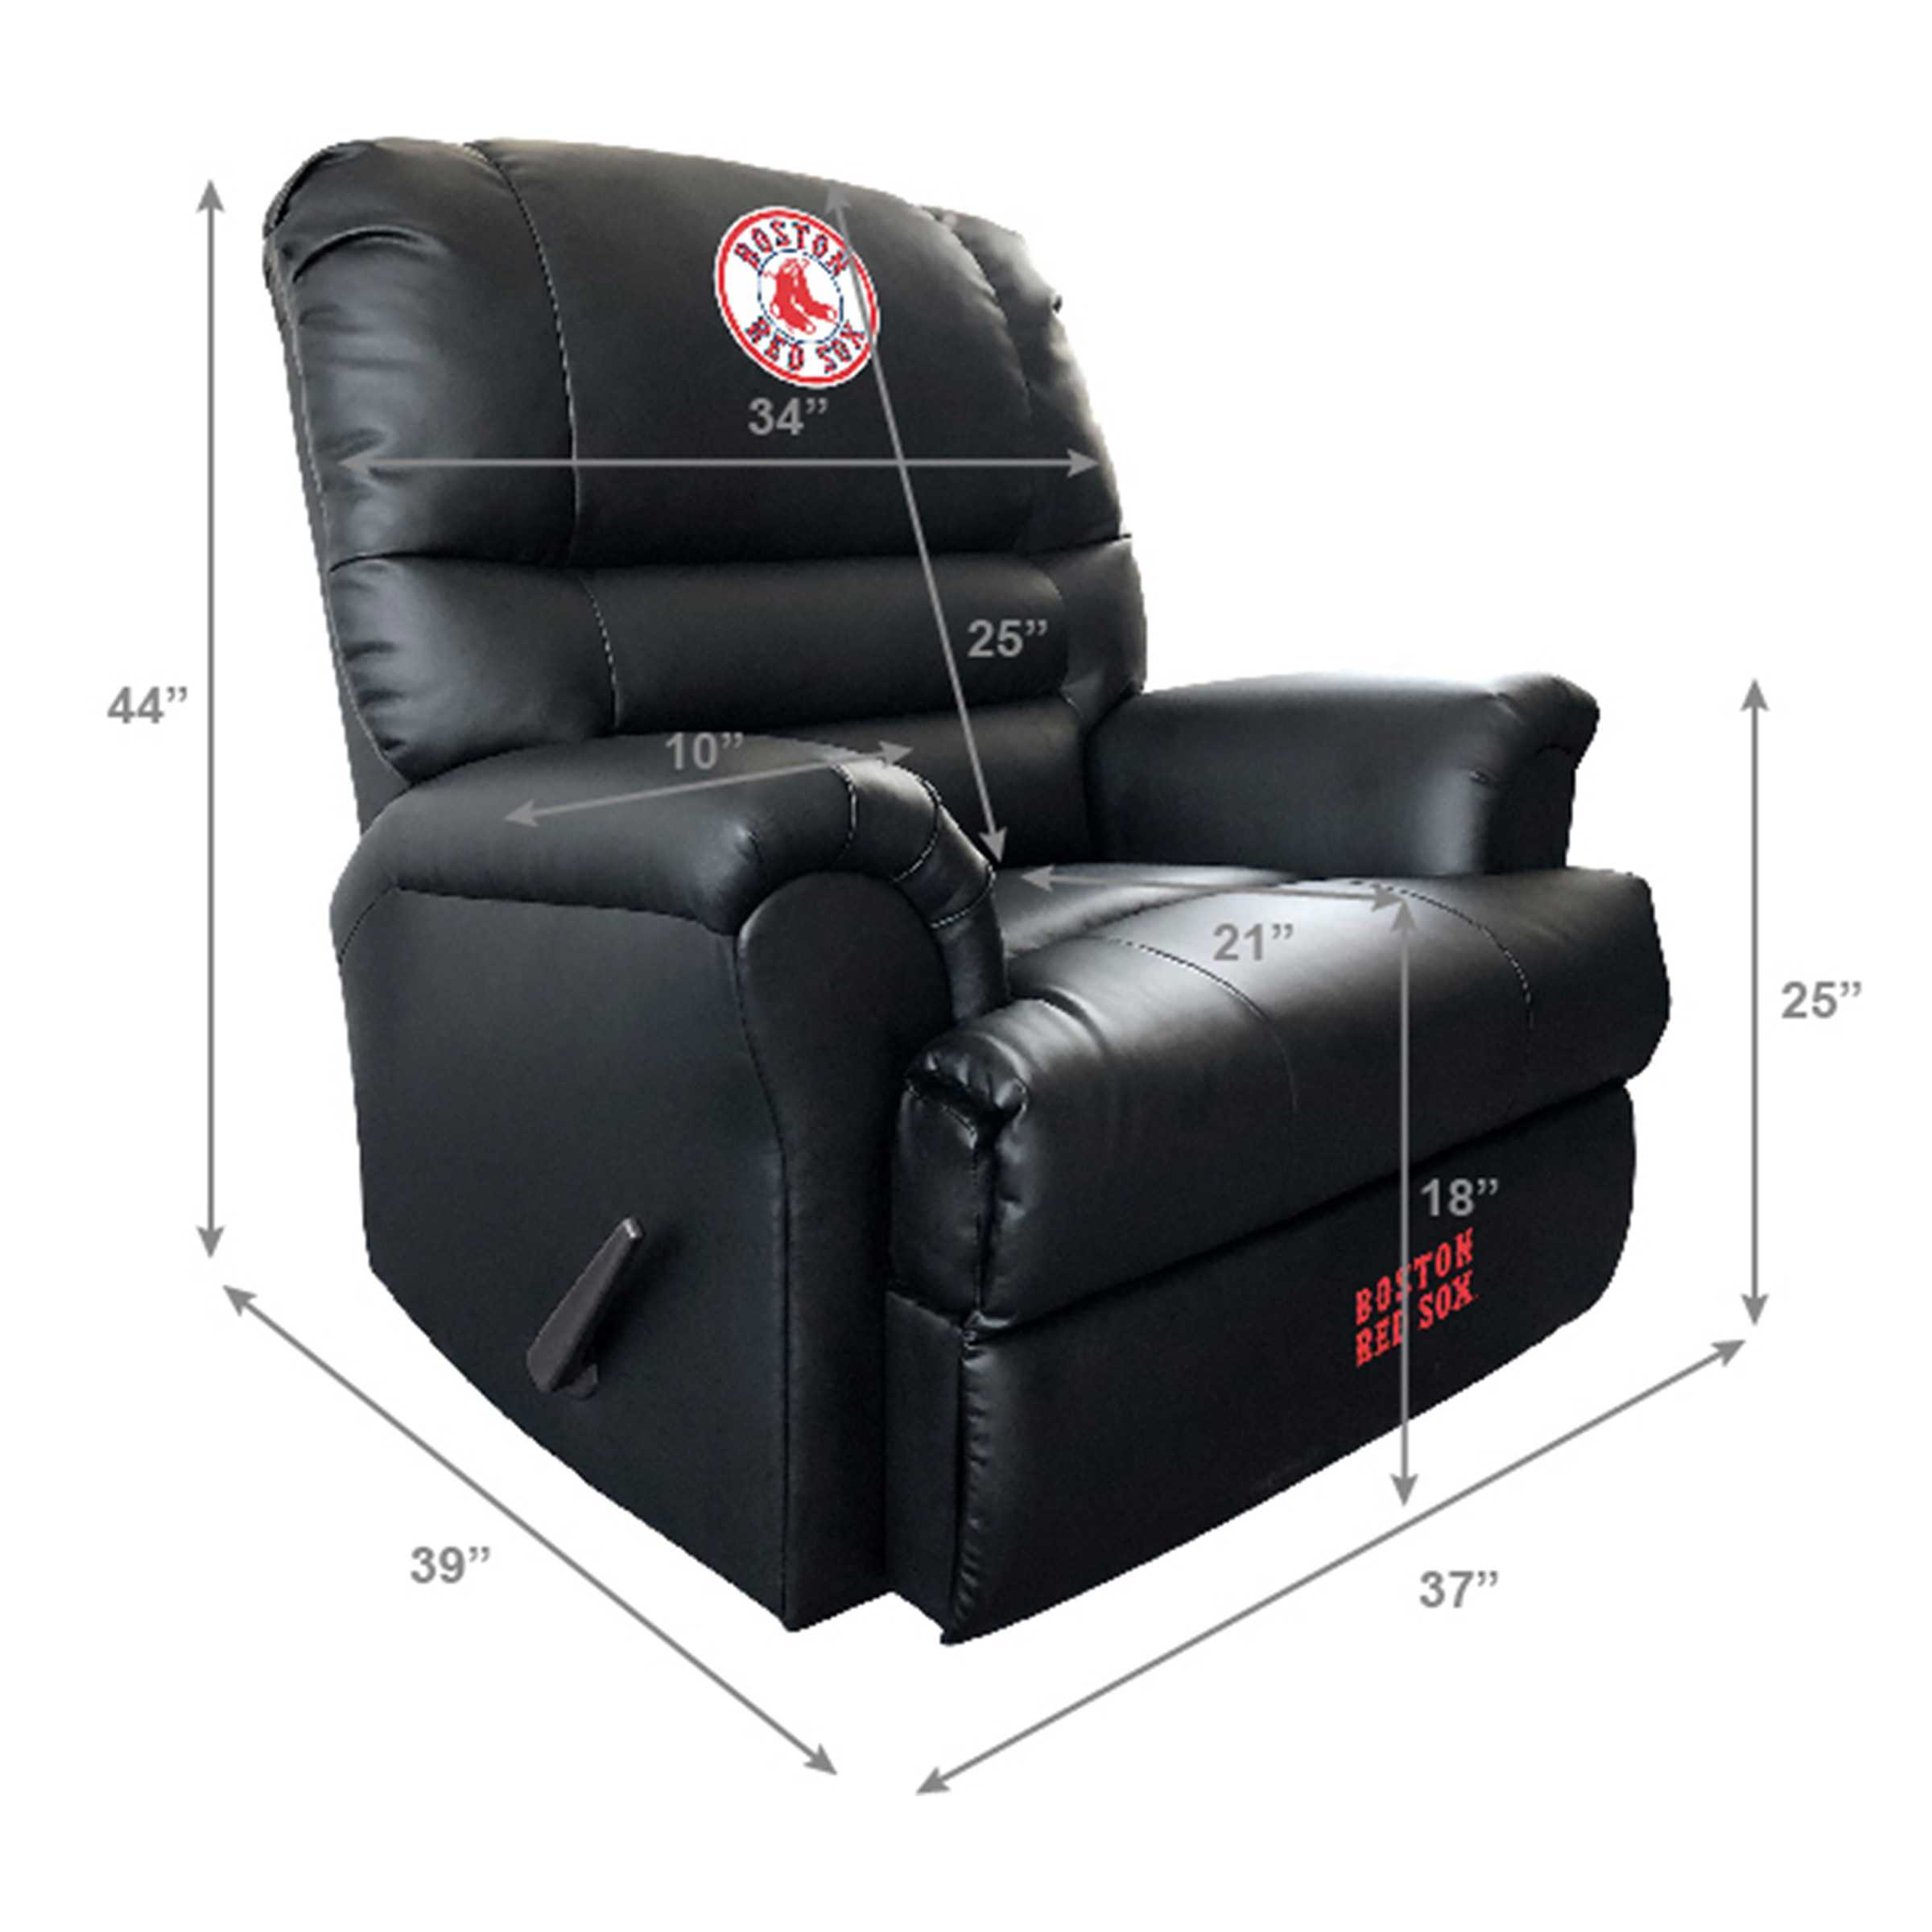 BOSTON RED SOX SPORTS RECLINER